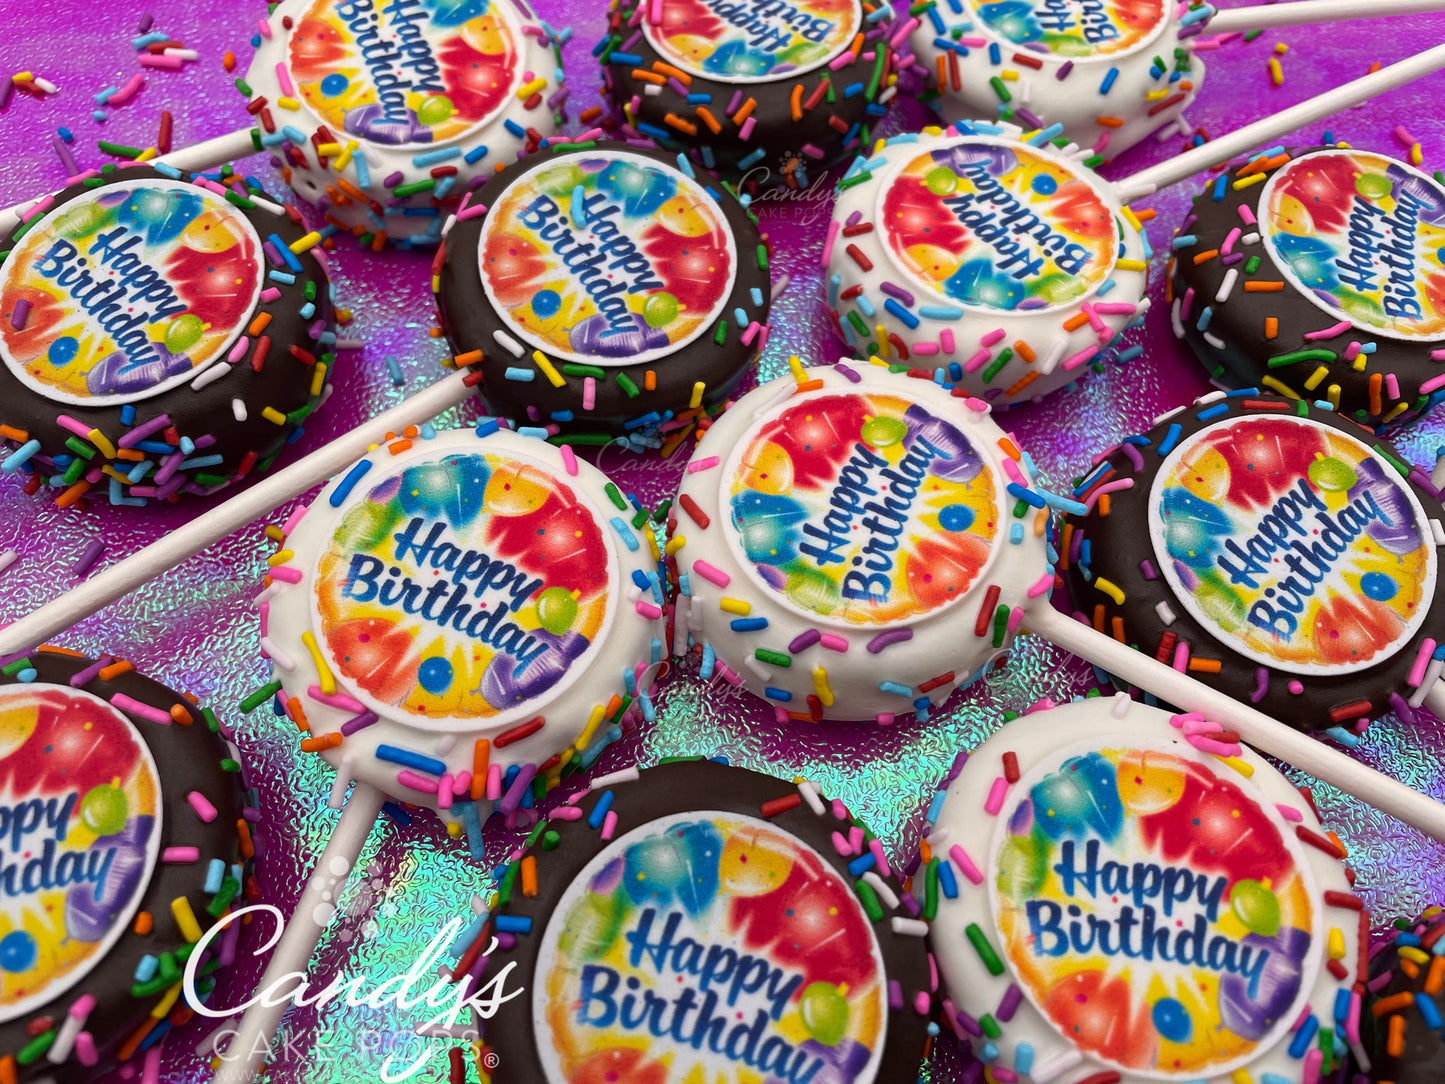 Happy Birthday Chocolate Covered Oreos - Candy's Cake Pops